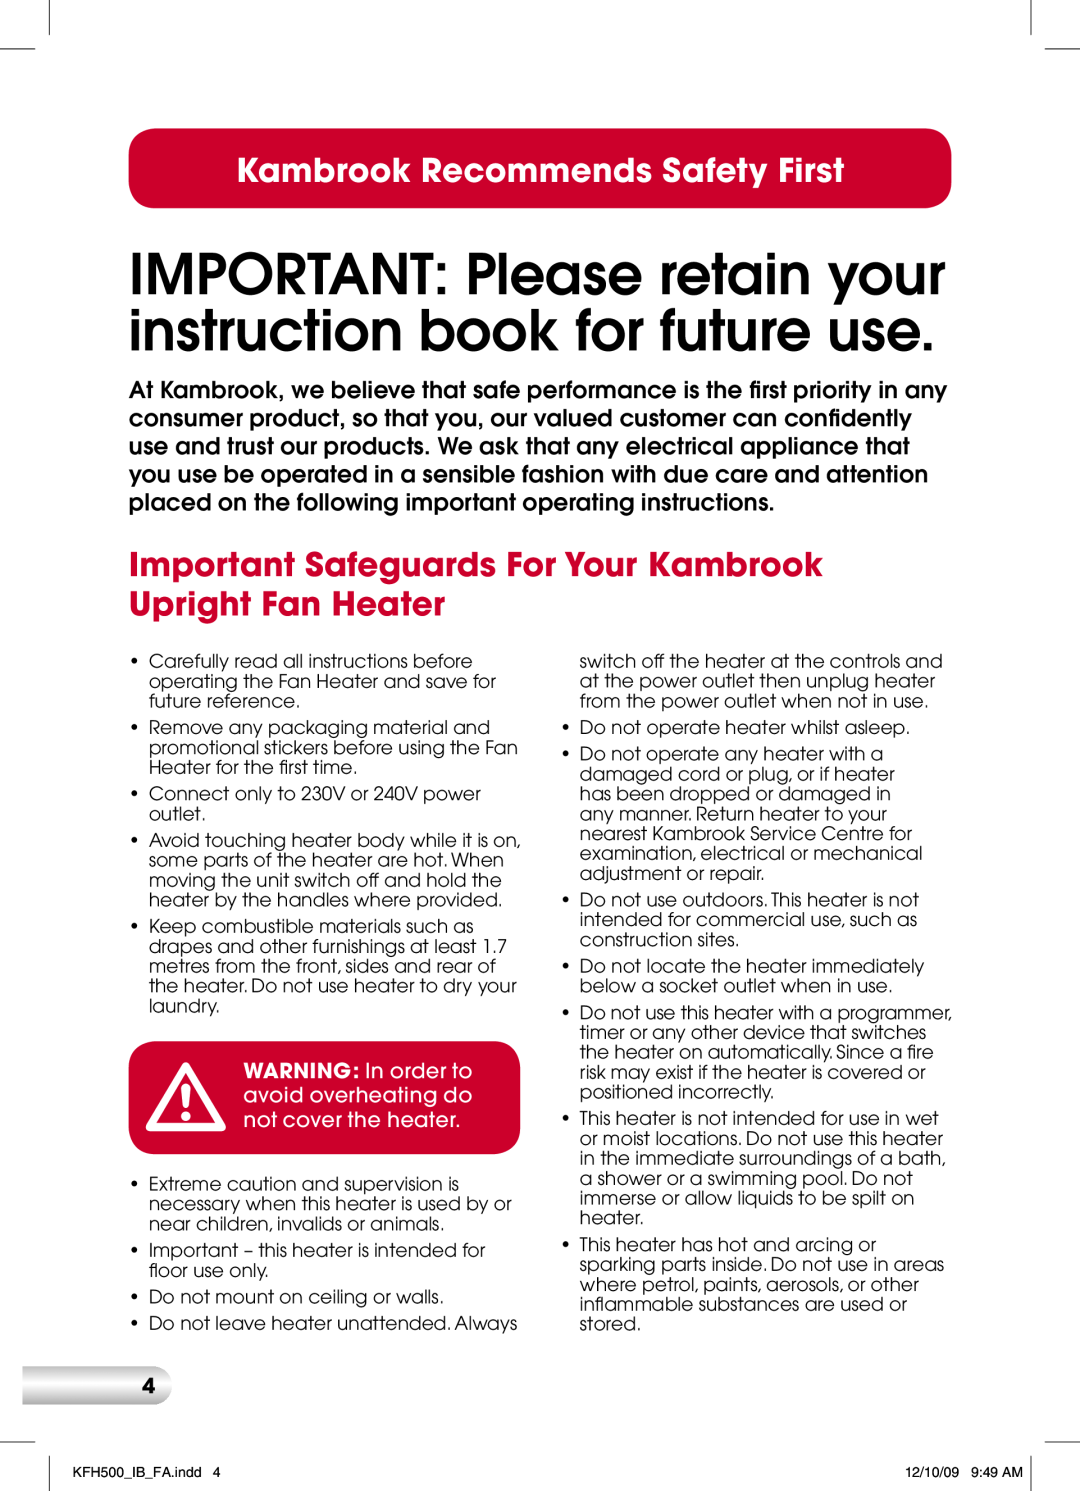 Kambrook KFH500 manual Kambrook Recommends Safety First 